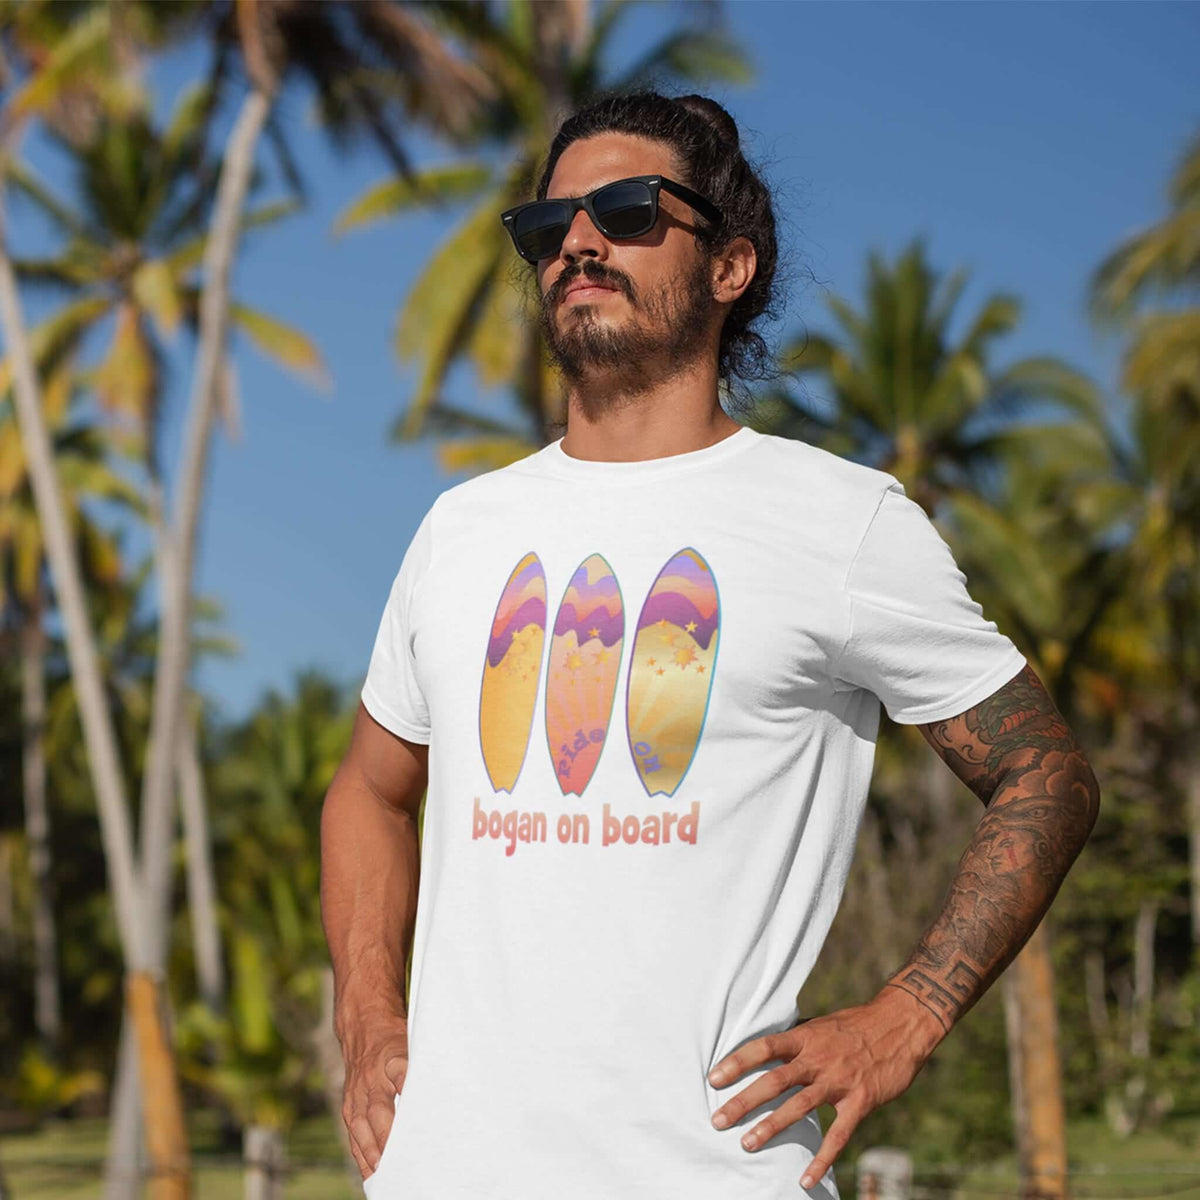 Man-wearing-white-tee-with-surfboard-design